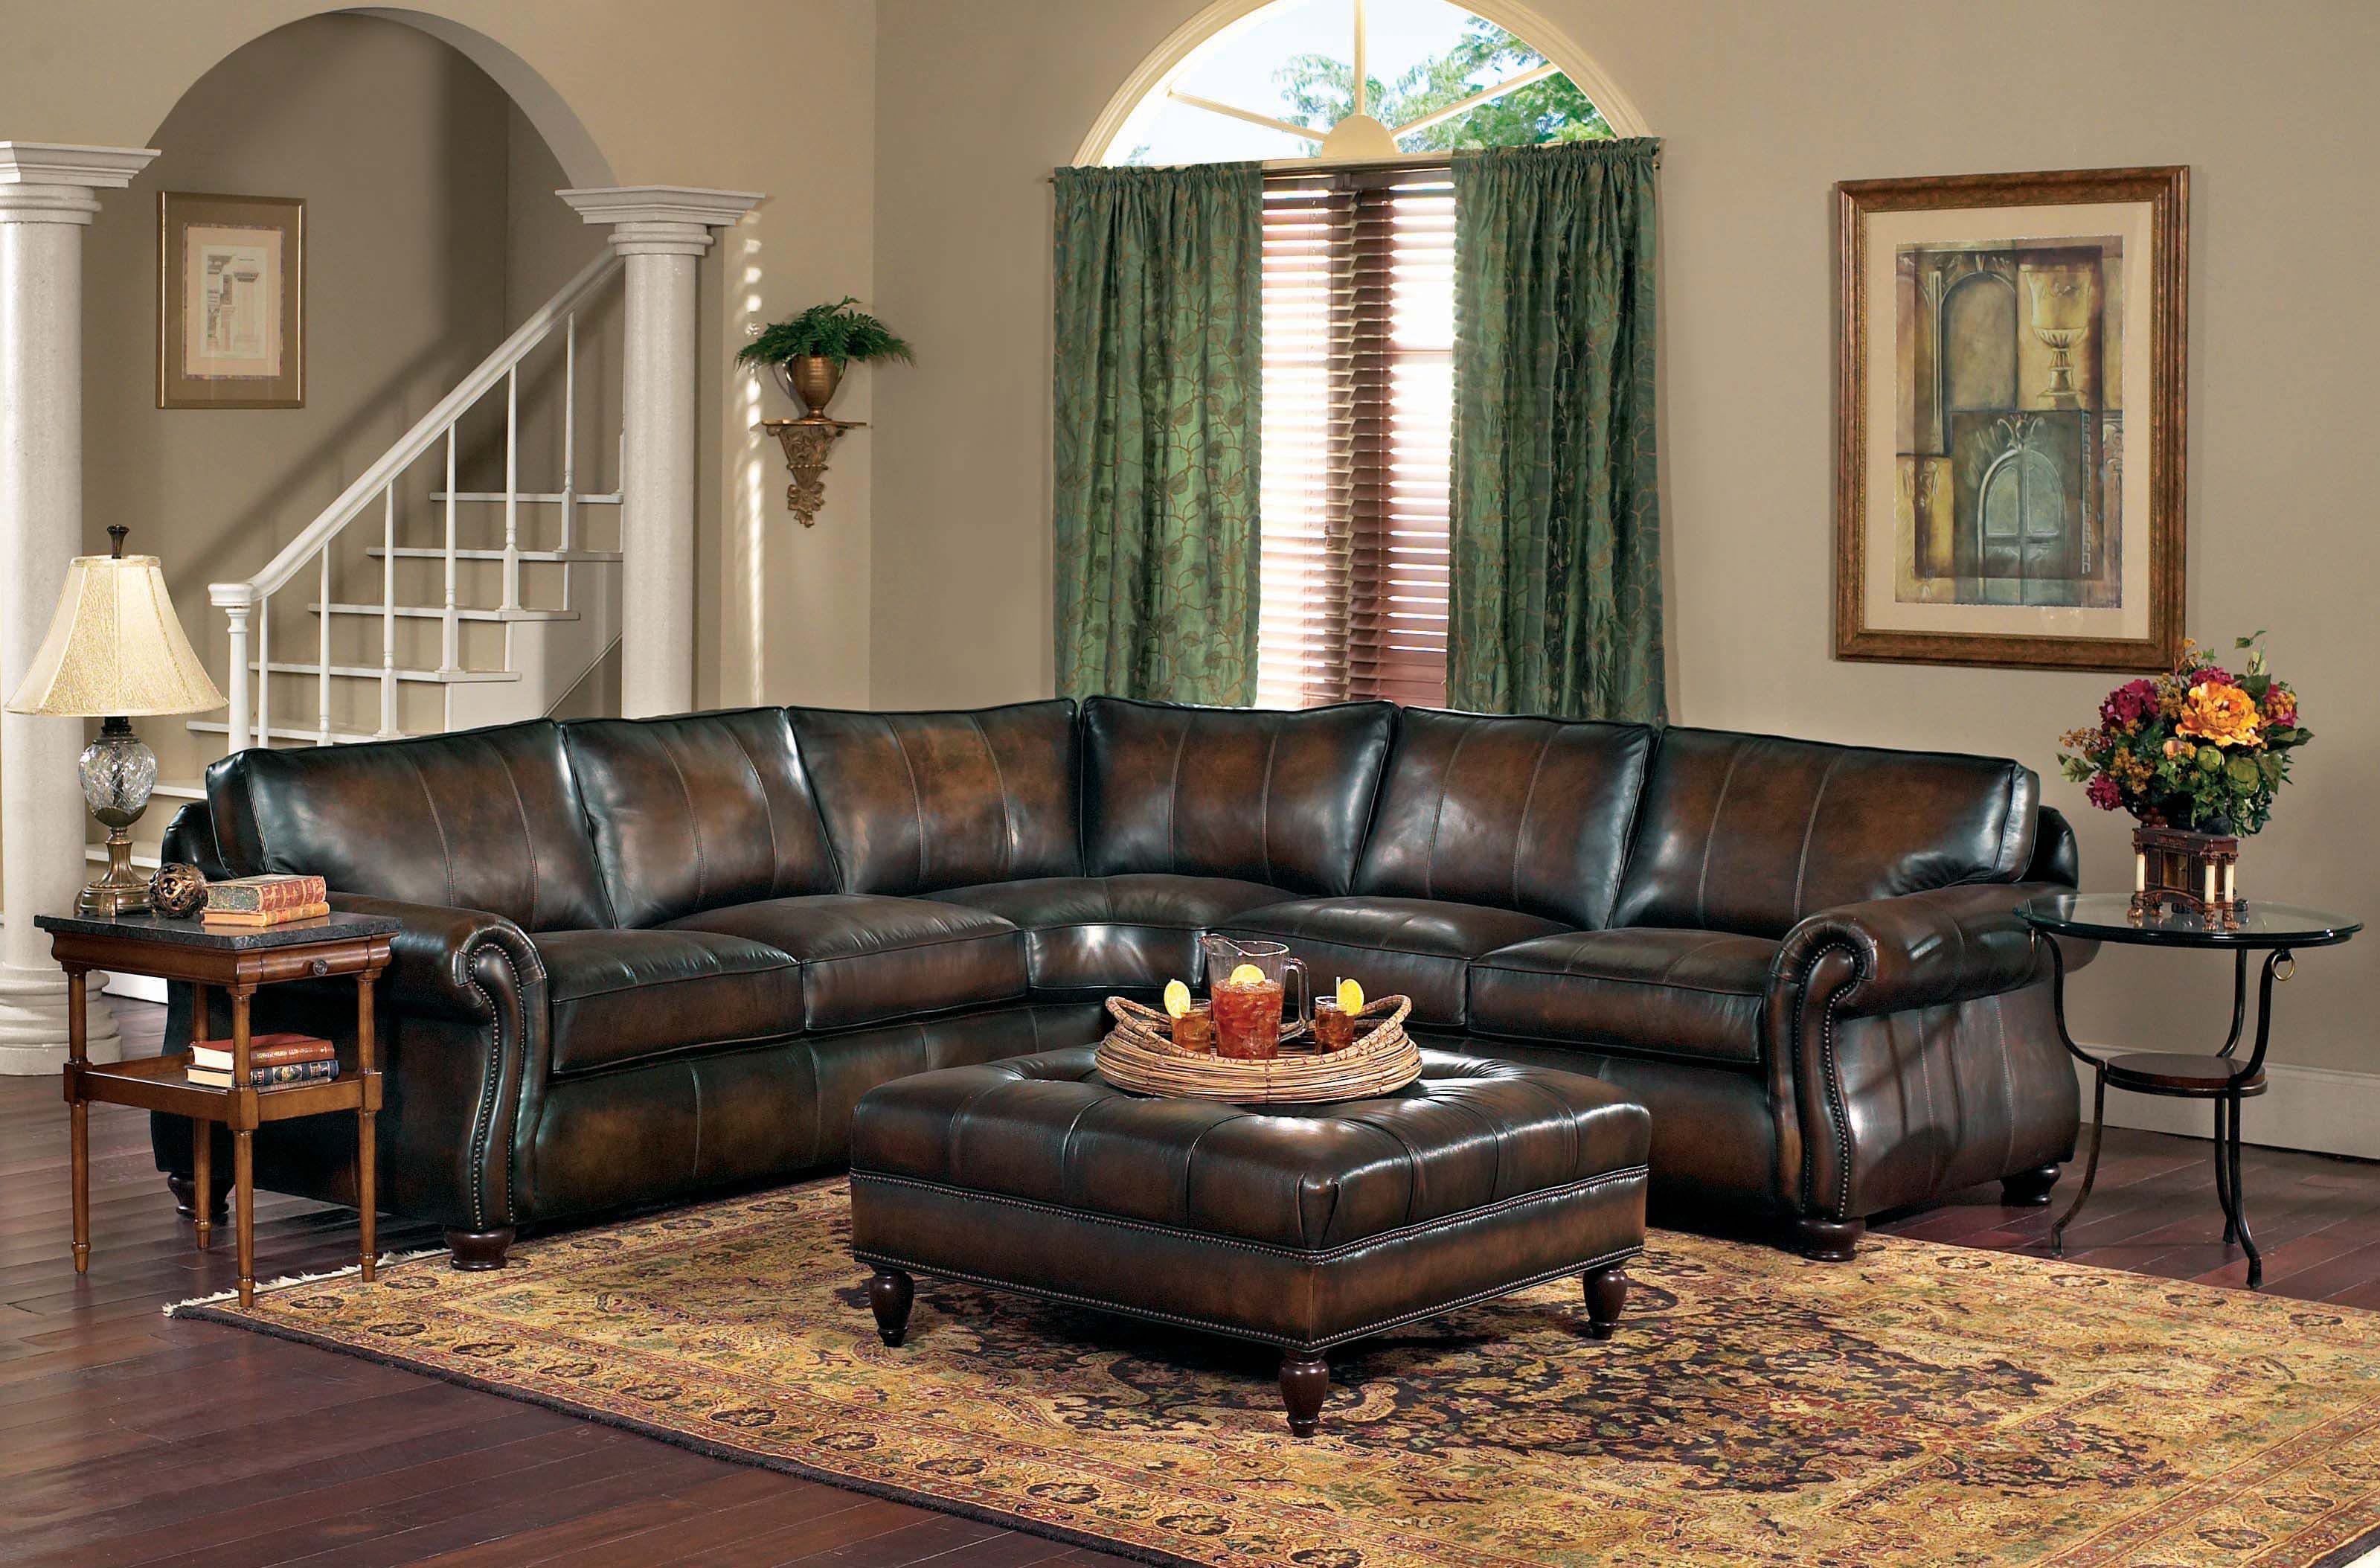 Living Room Van Gogh 2-Piece Leather Sectional